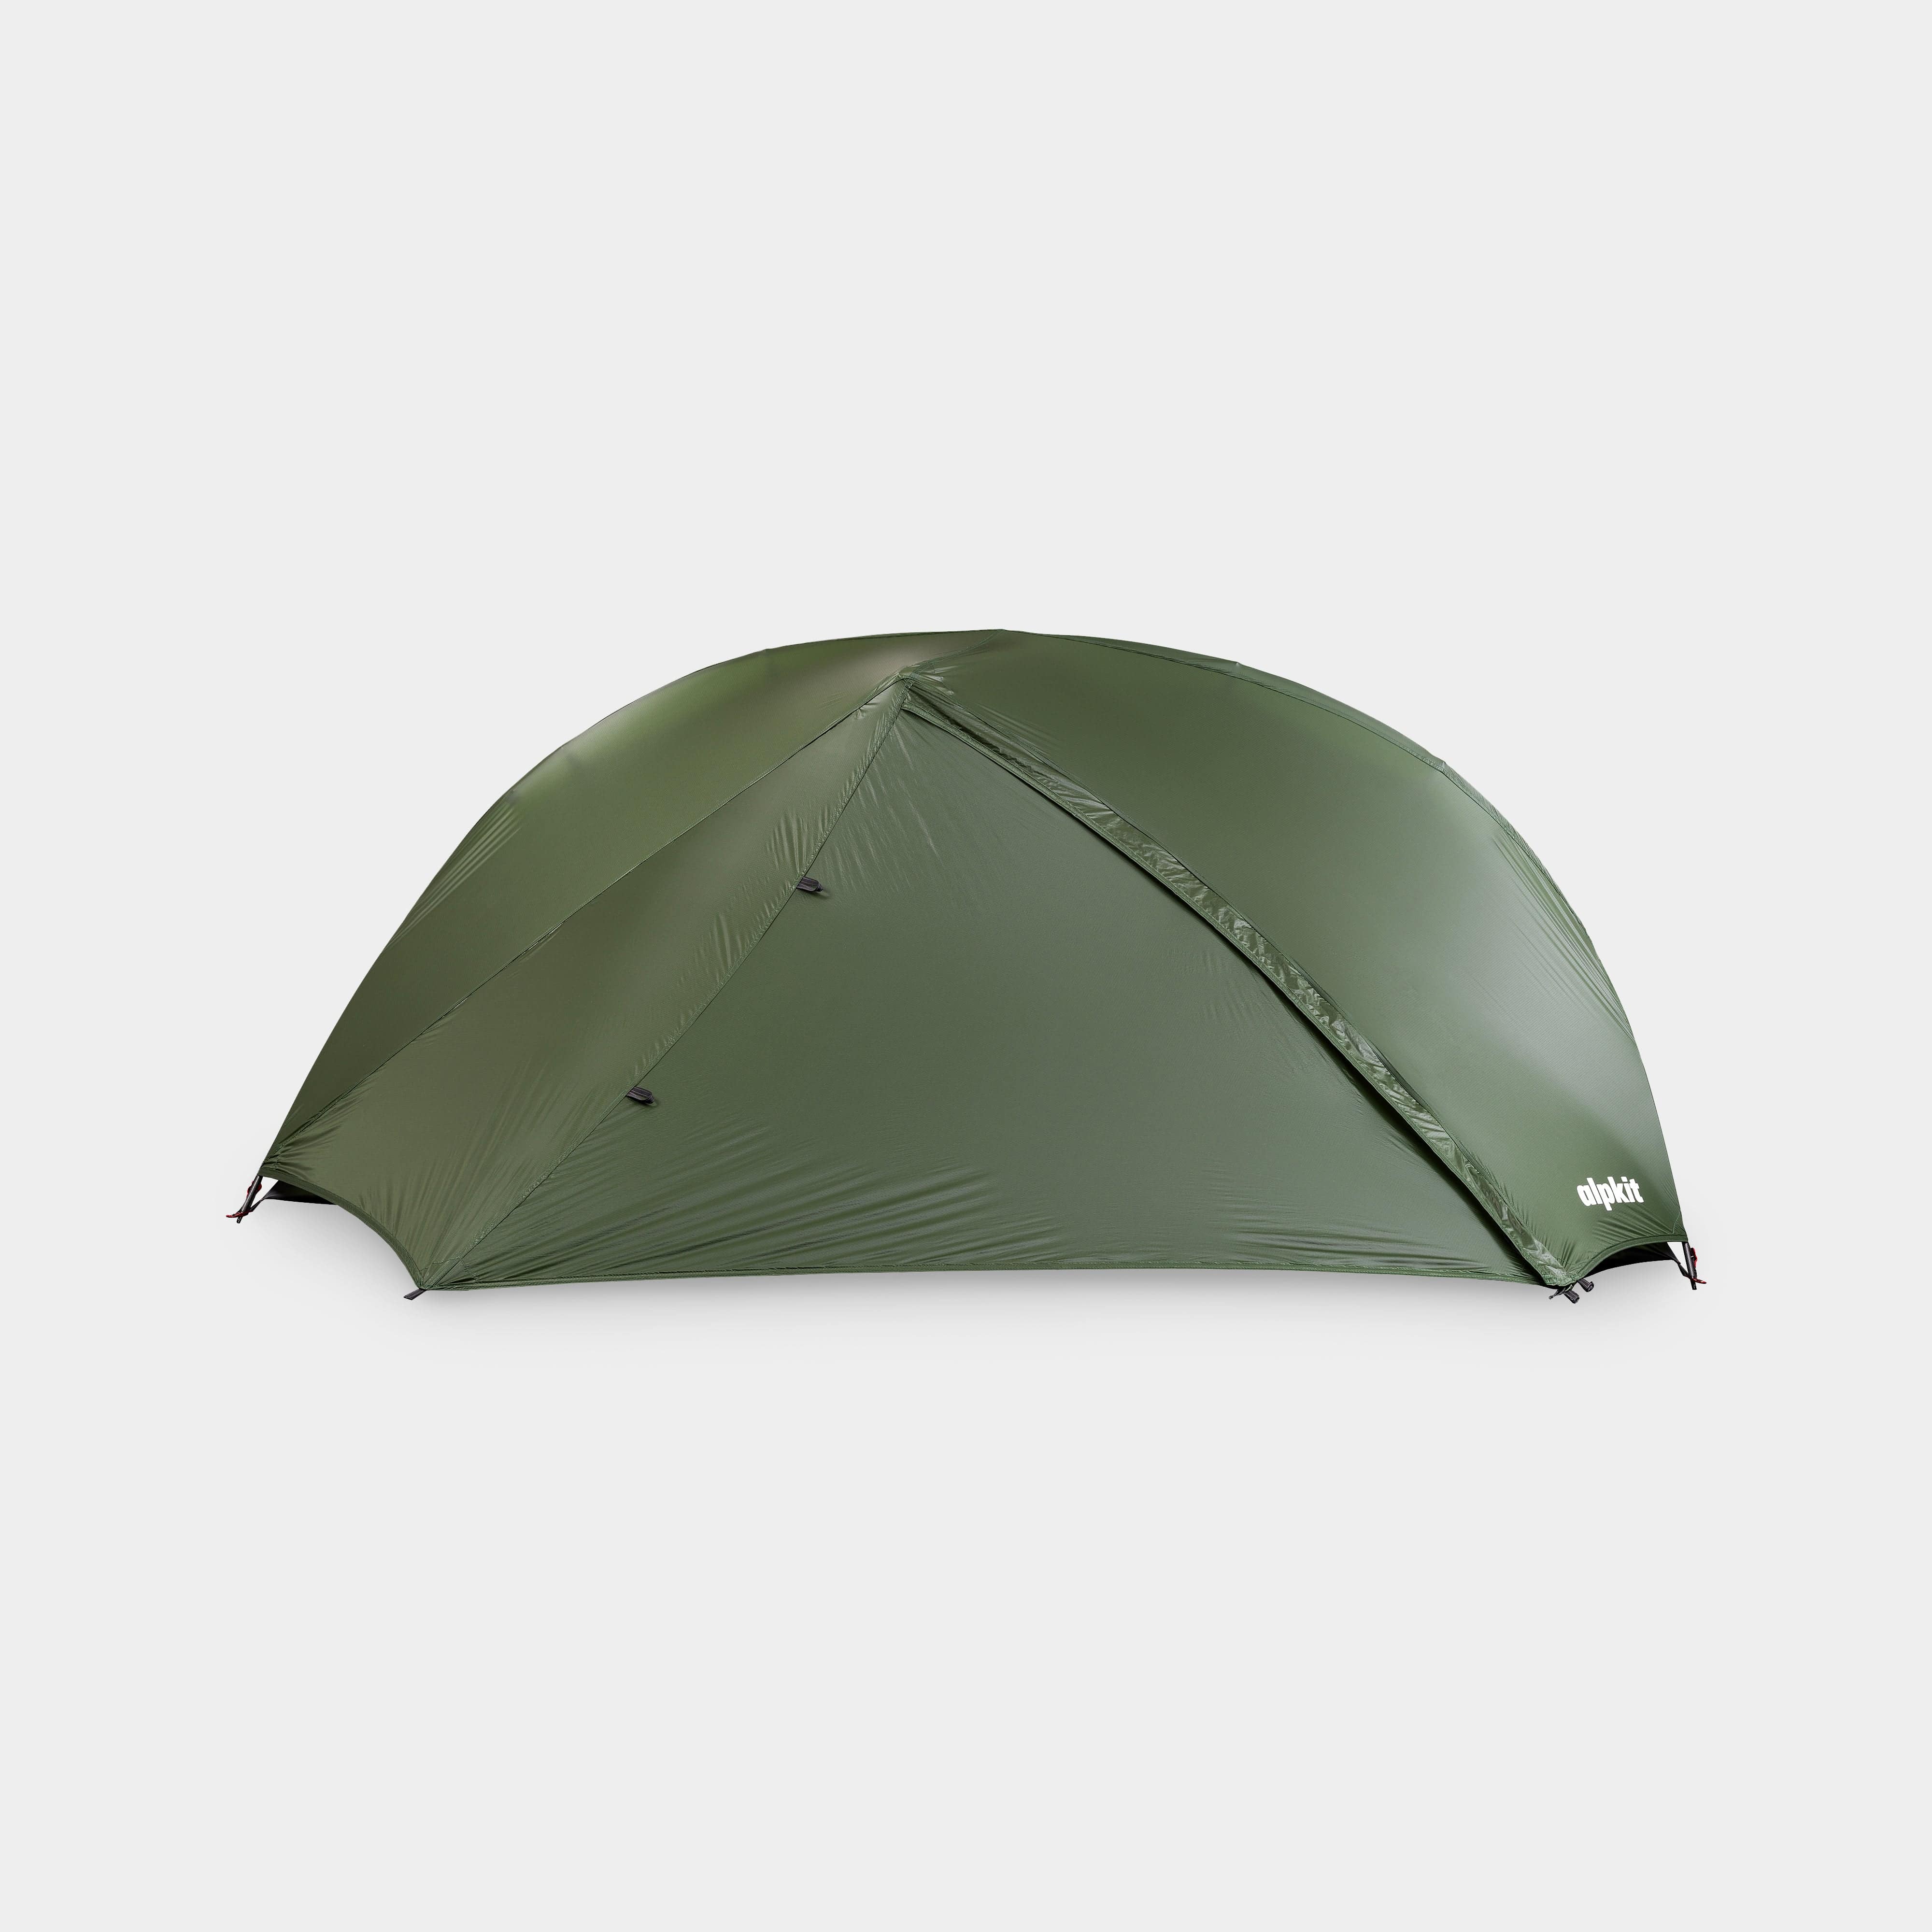 Tents for Backpacking, Bikepacking & Mountaineering | 1 to 6